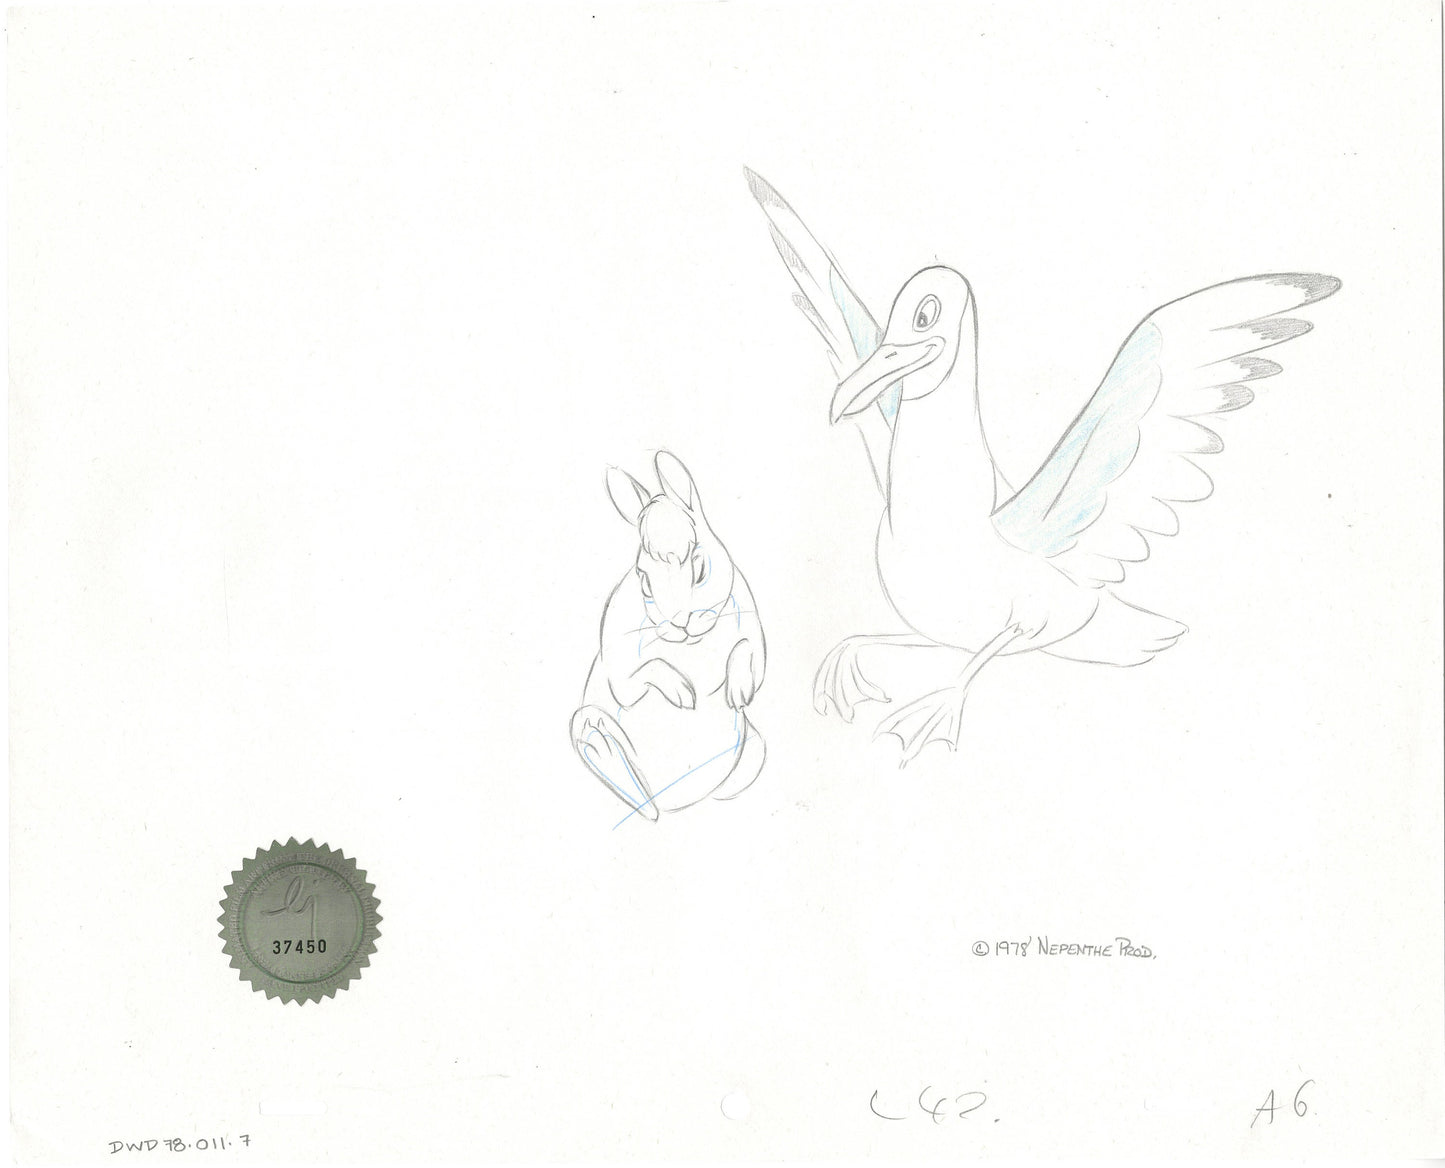 Watership Down 1978 Production Animation Cel Drawing of Bigwig and Kehaar with Linda Jones Seal and Certificate of Authenticity 011-007